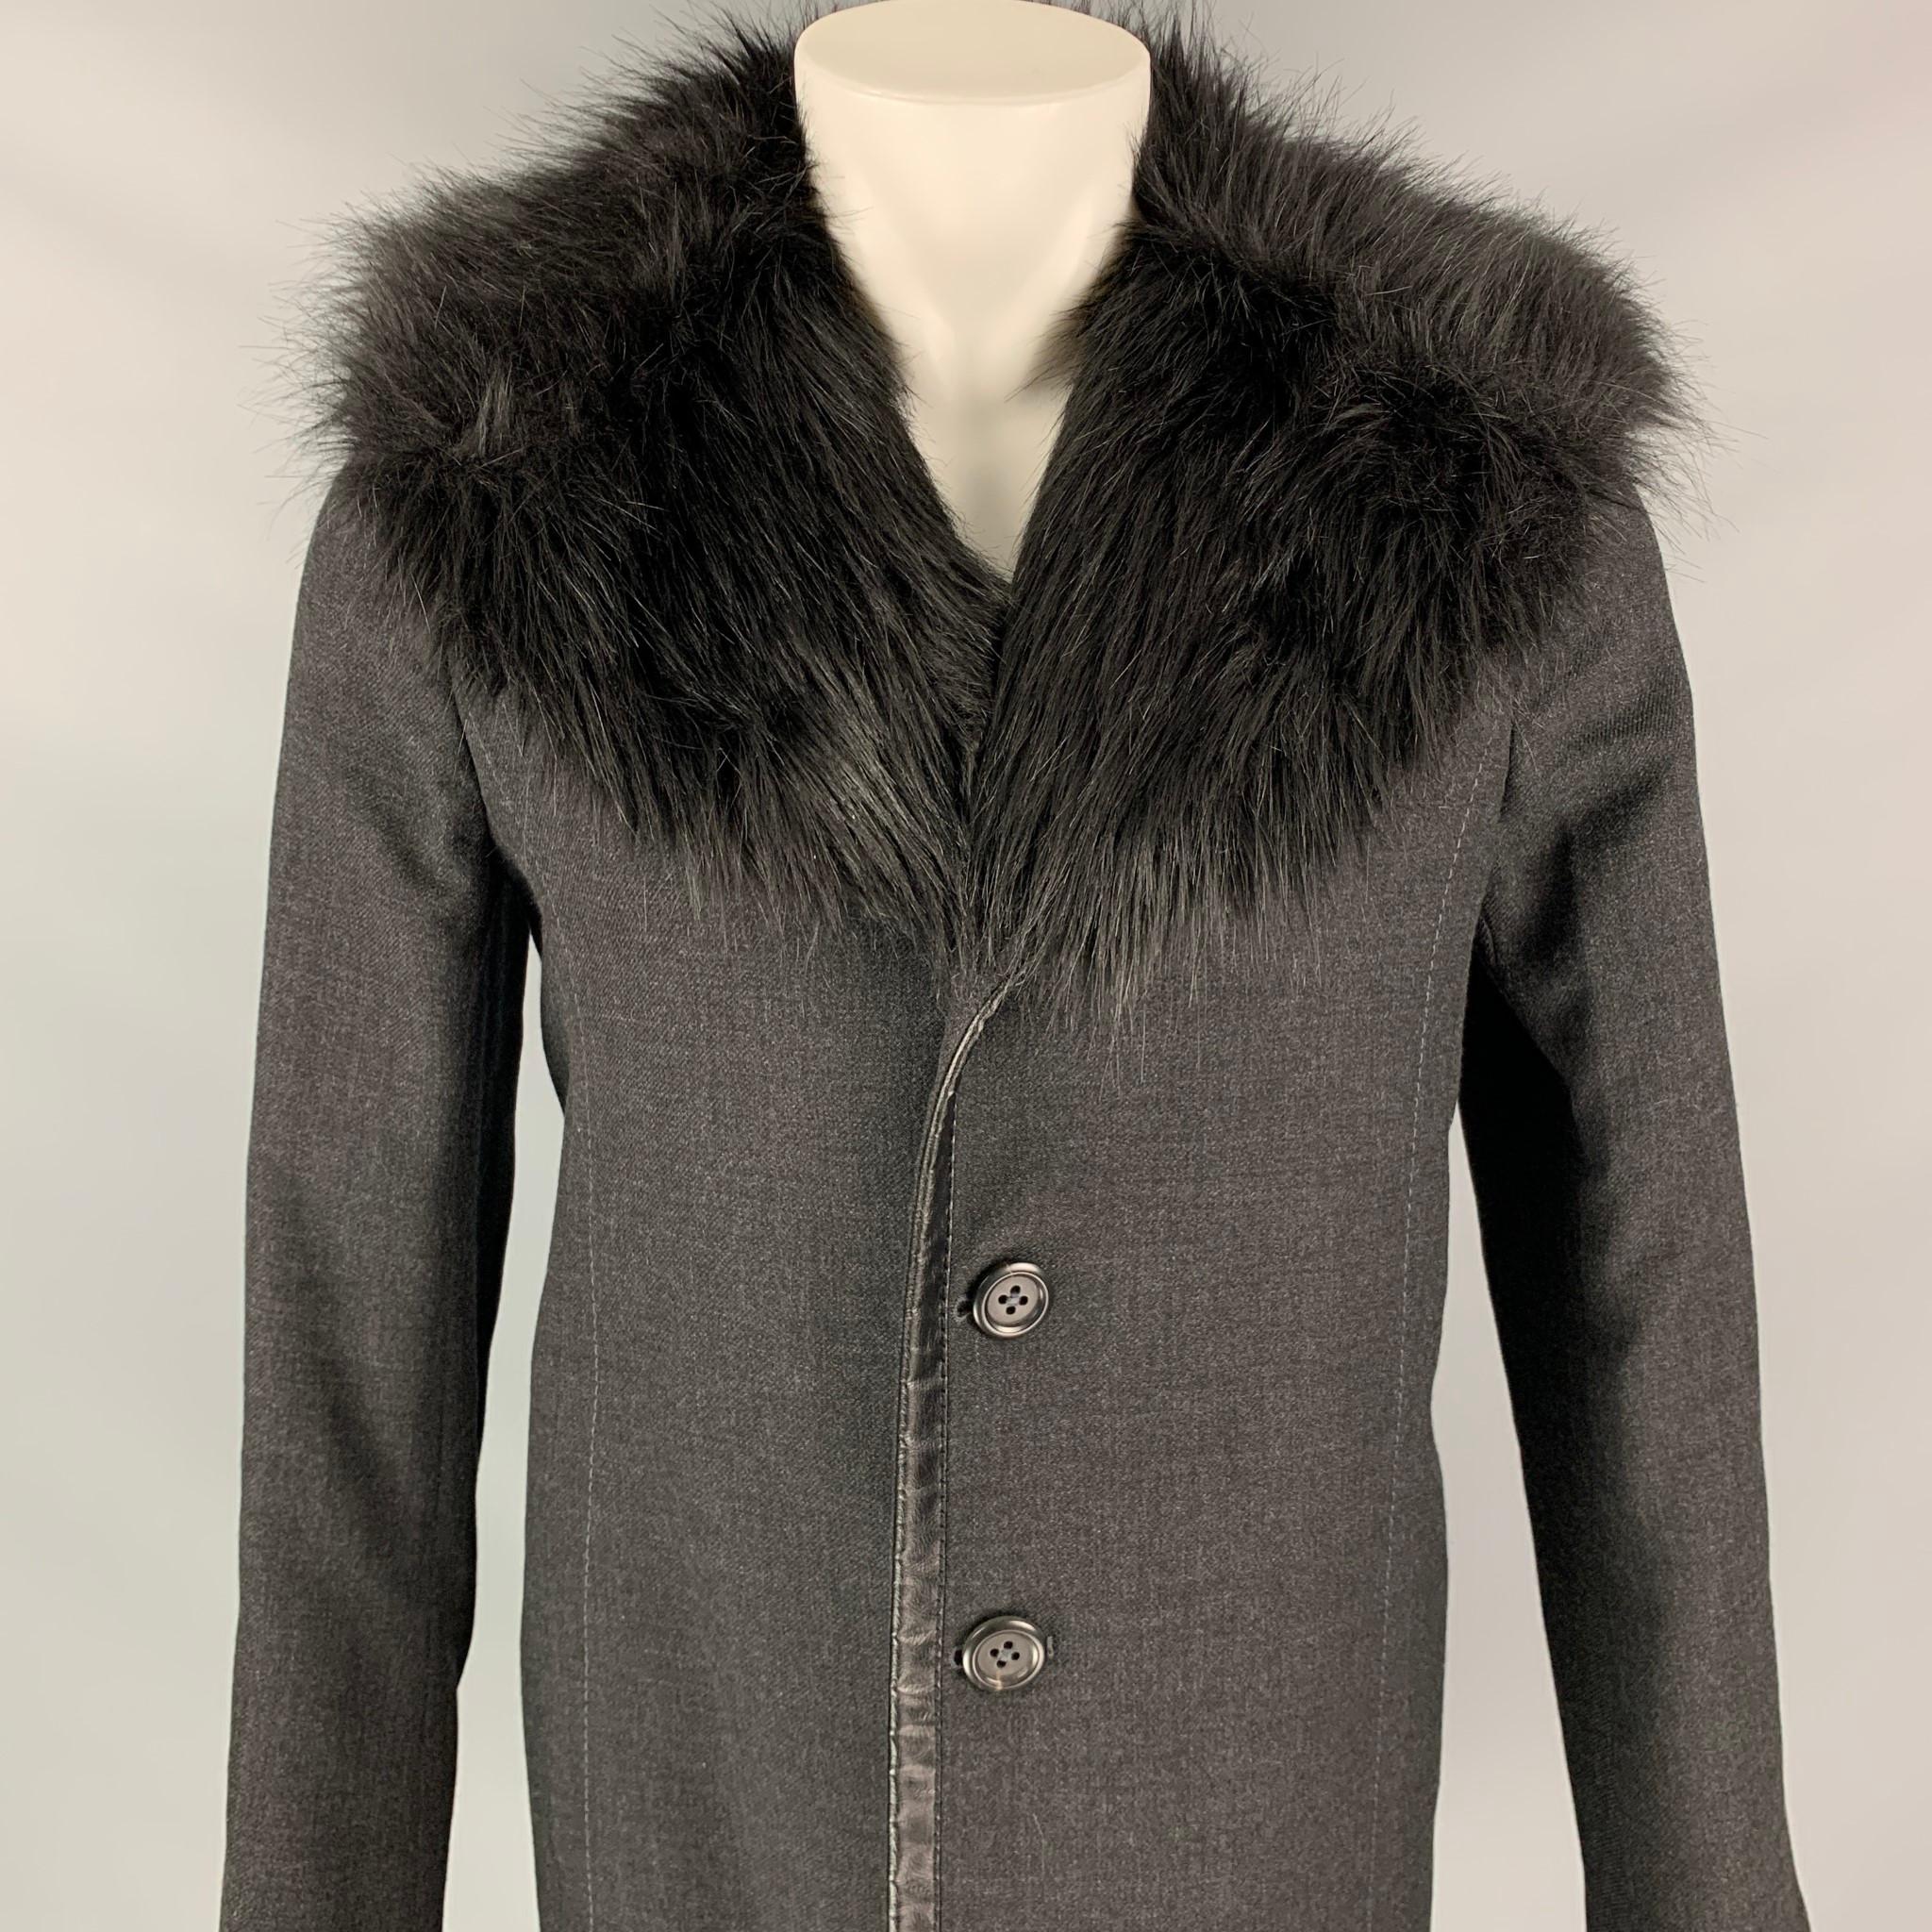 MARC JACOBS car coat comes in a charcoal wool with a full quilted liner featuring a faux fur lapel, leather trim, top stitching, slit pockets, and a buttoned closure. 

Very Good Pre-Owned Condition.
Marked: L

Measurements:

Shoulder: 17 in.
Chest: